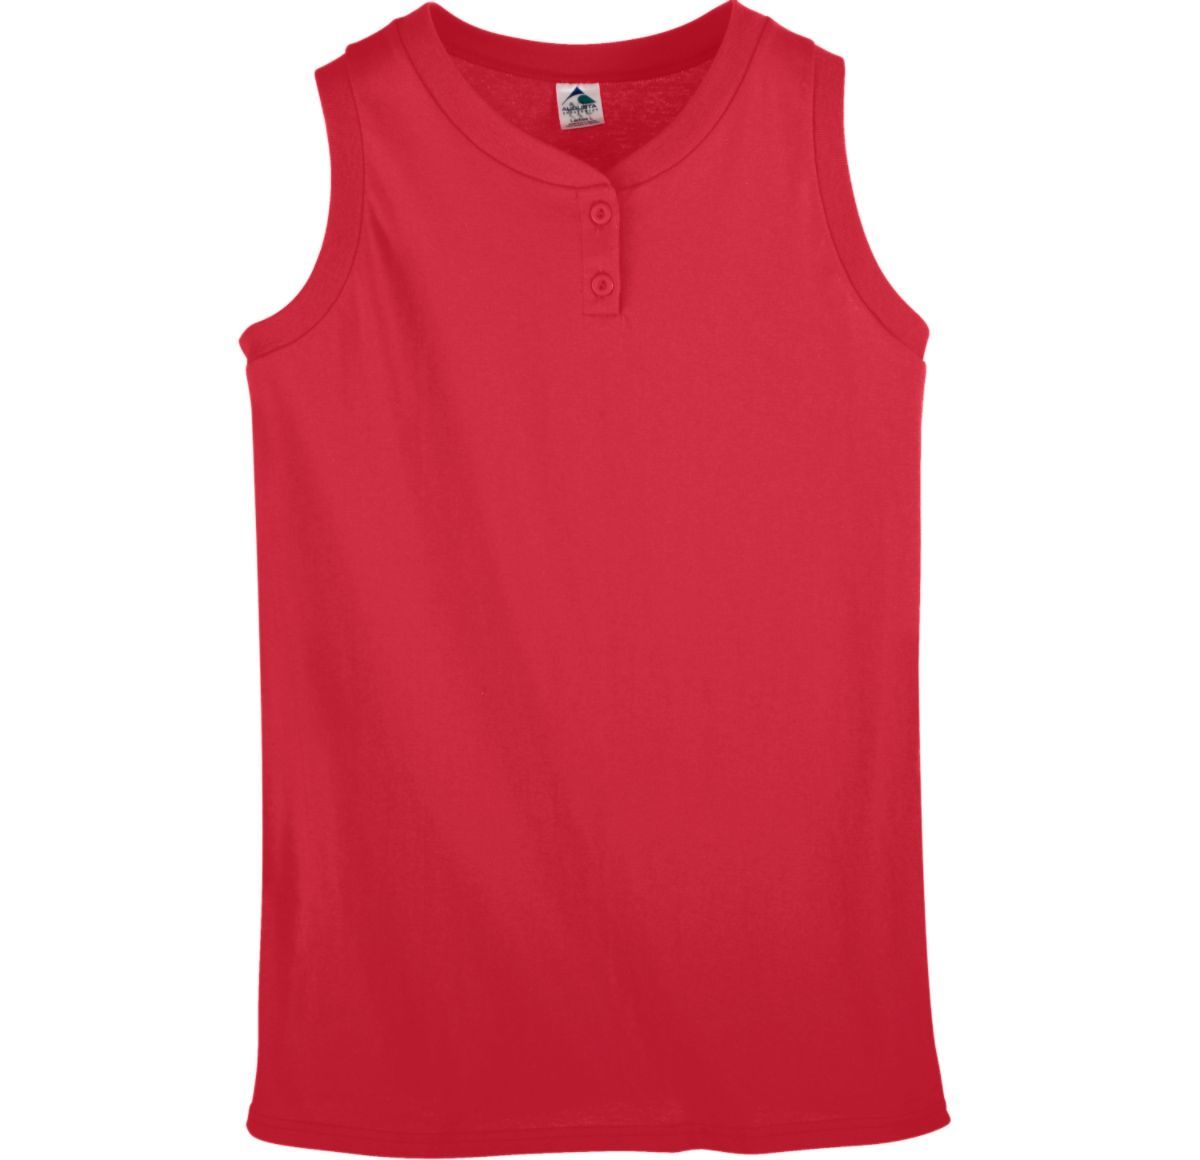 Augusta Sportswear Ladies Sleeveless Two Button Softball Jersey in Red  -Part of the Ladies, Ladies-Jersey, Augusta-Products, Softball, Shirts product lines at KanaleyCreations.com